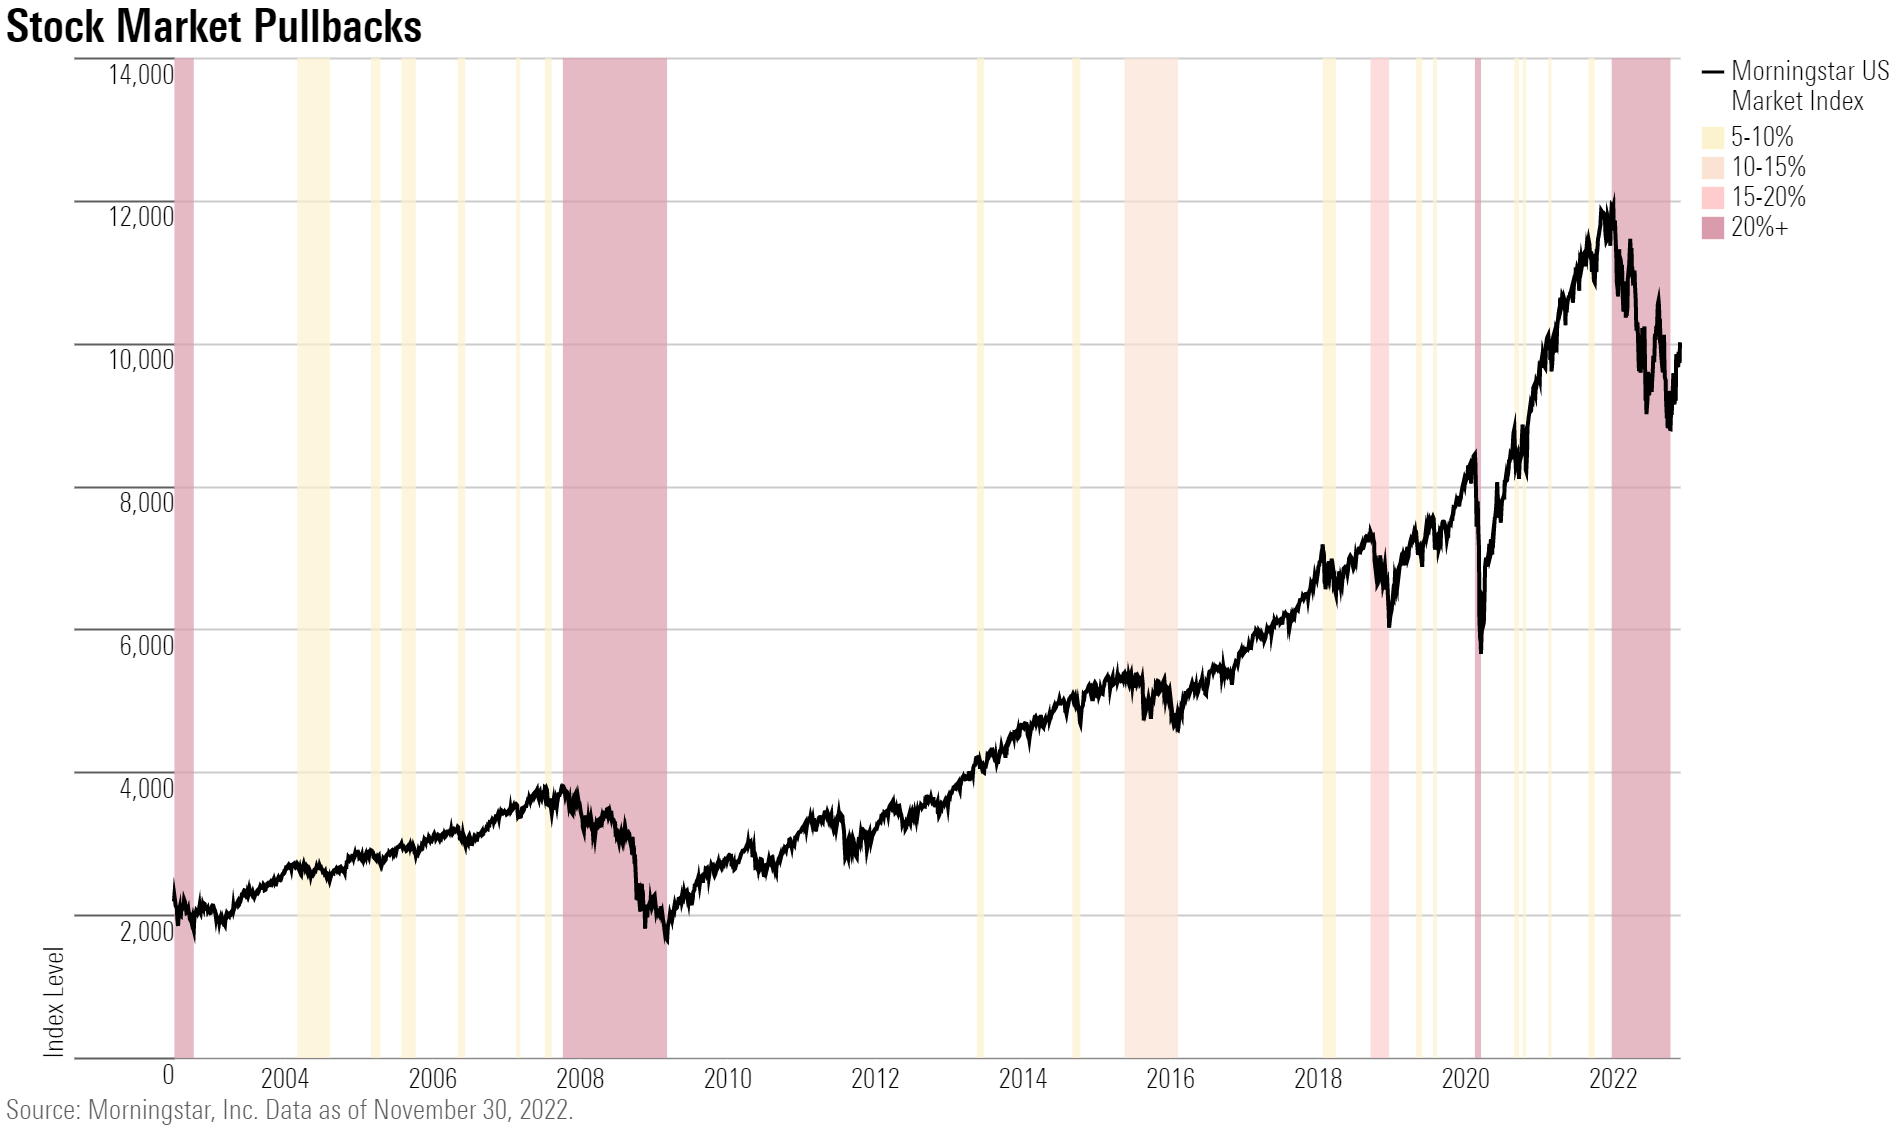 A line chart showing stock market pullbacks from their most recent peaks in the last ten years.